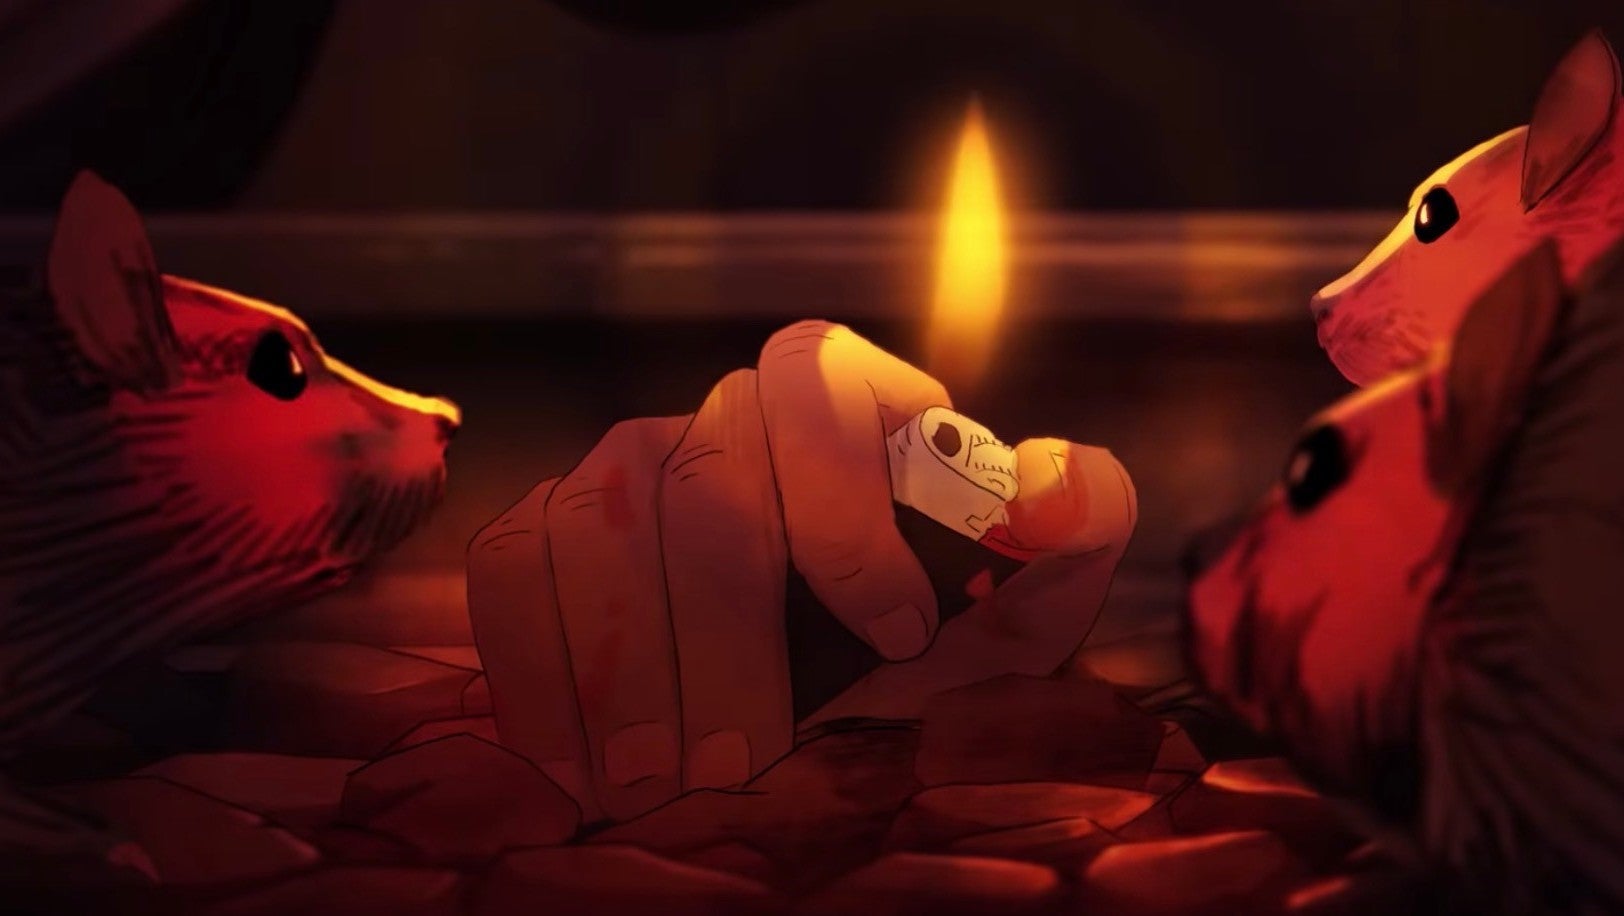 A Severed Hand Searches For Its Body In An Award-Winning Netflix Animated Film